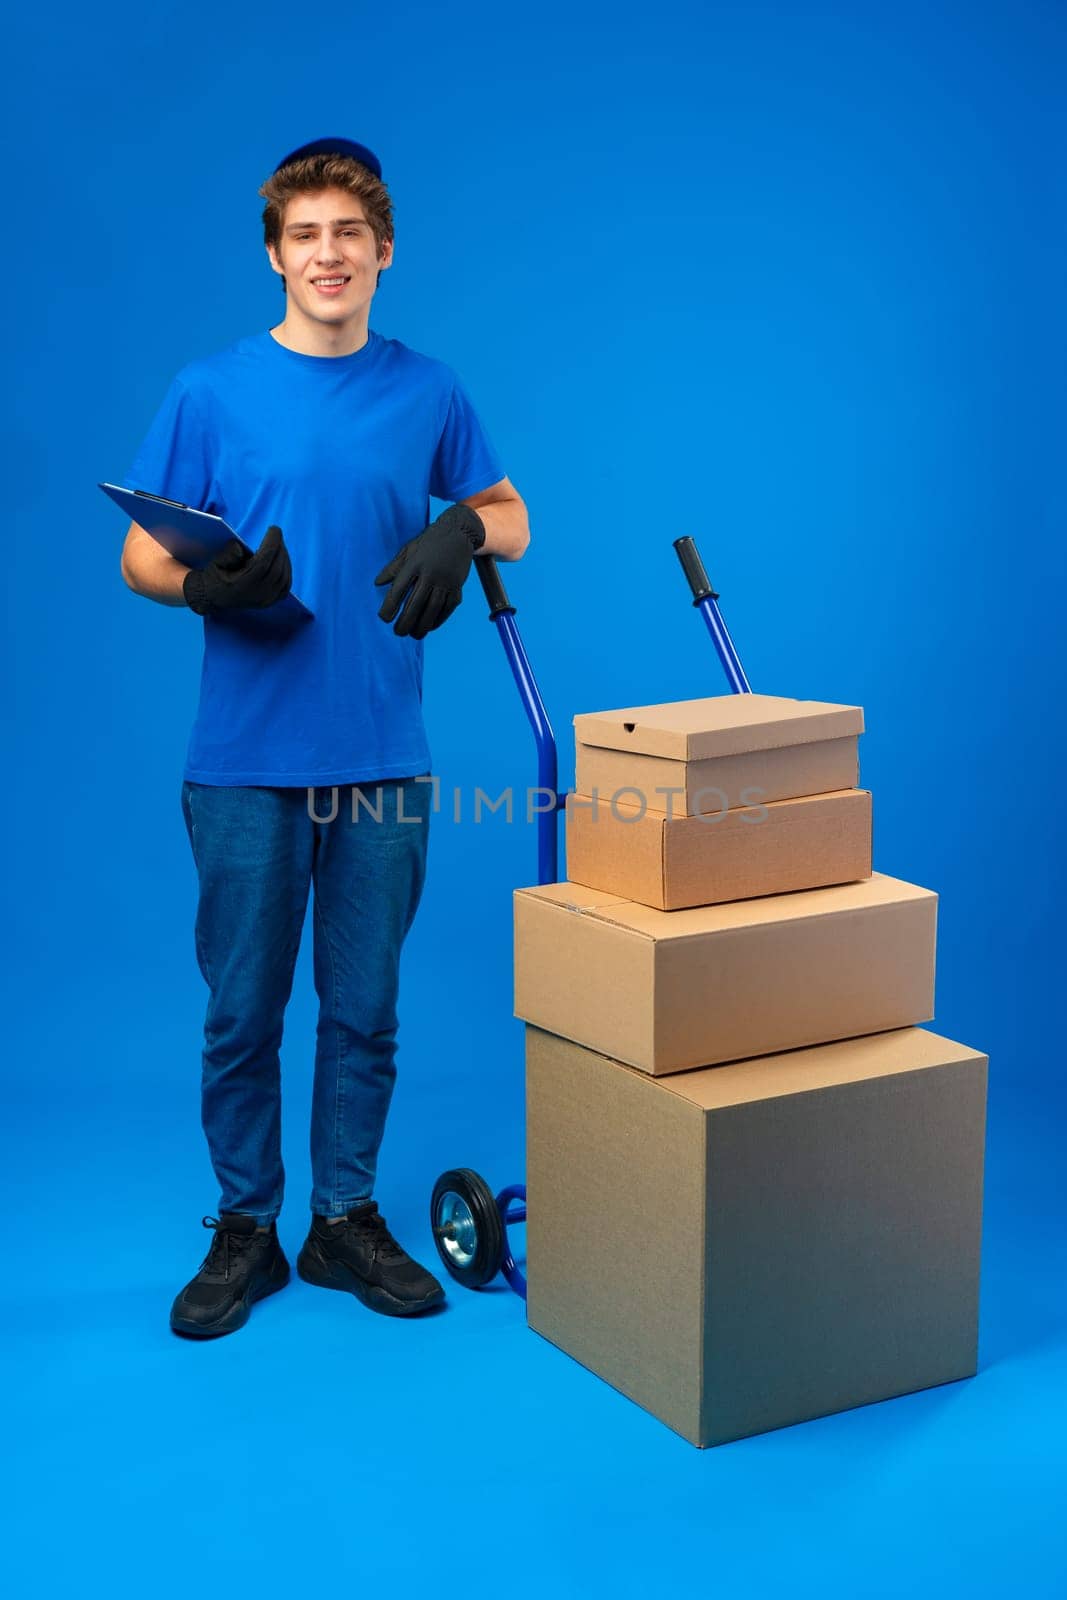 Young happy delivery man carrying boxes on truck against blue background in studio